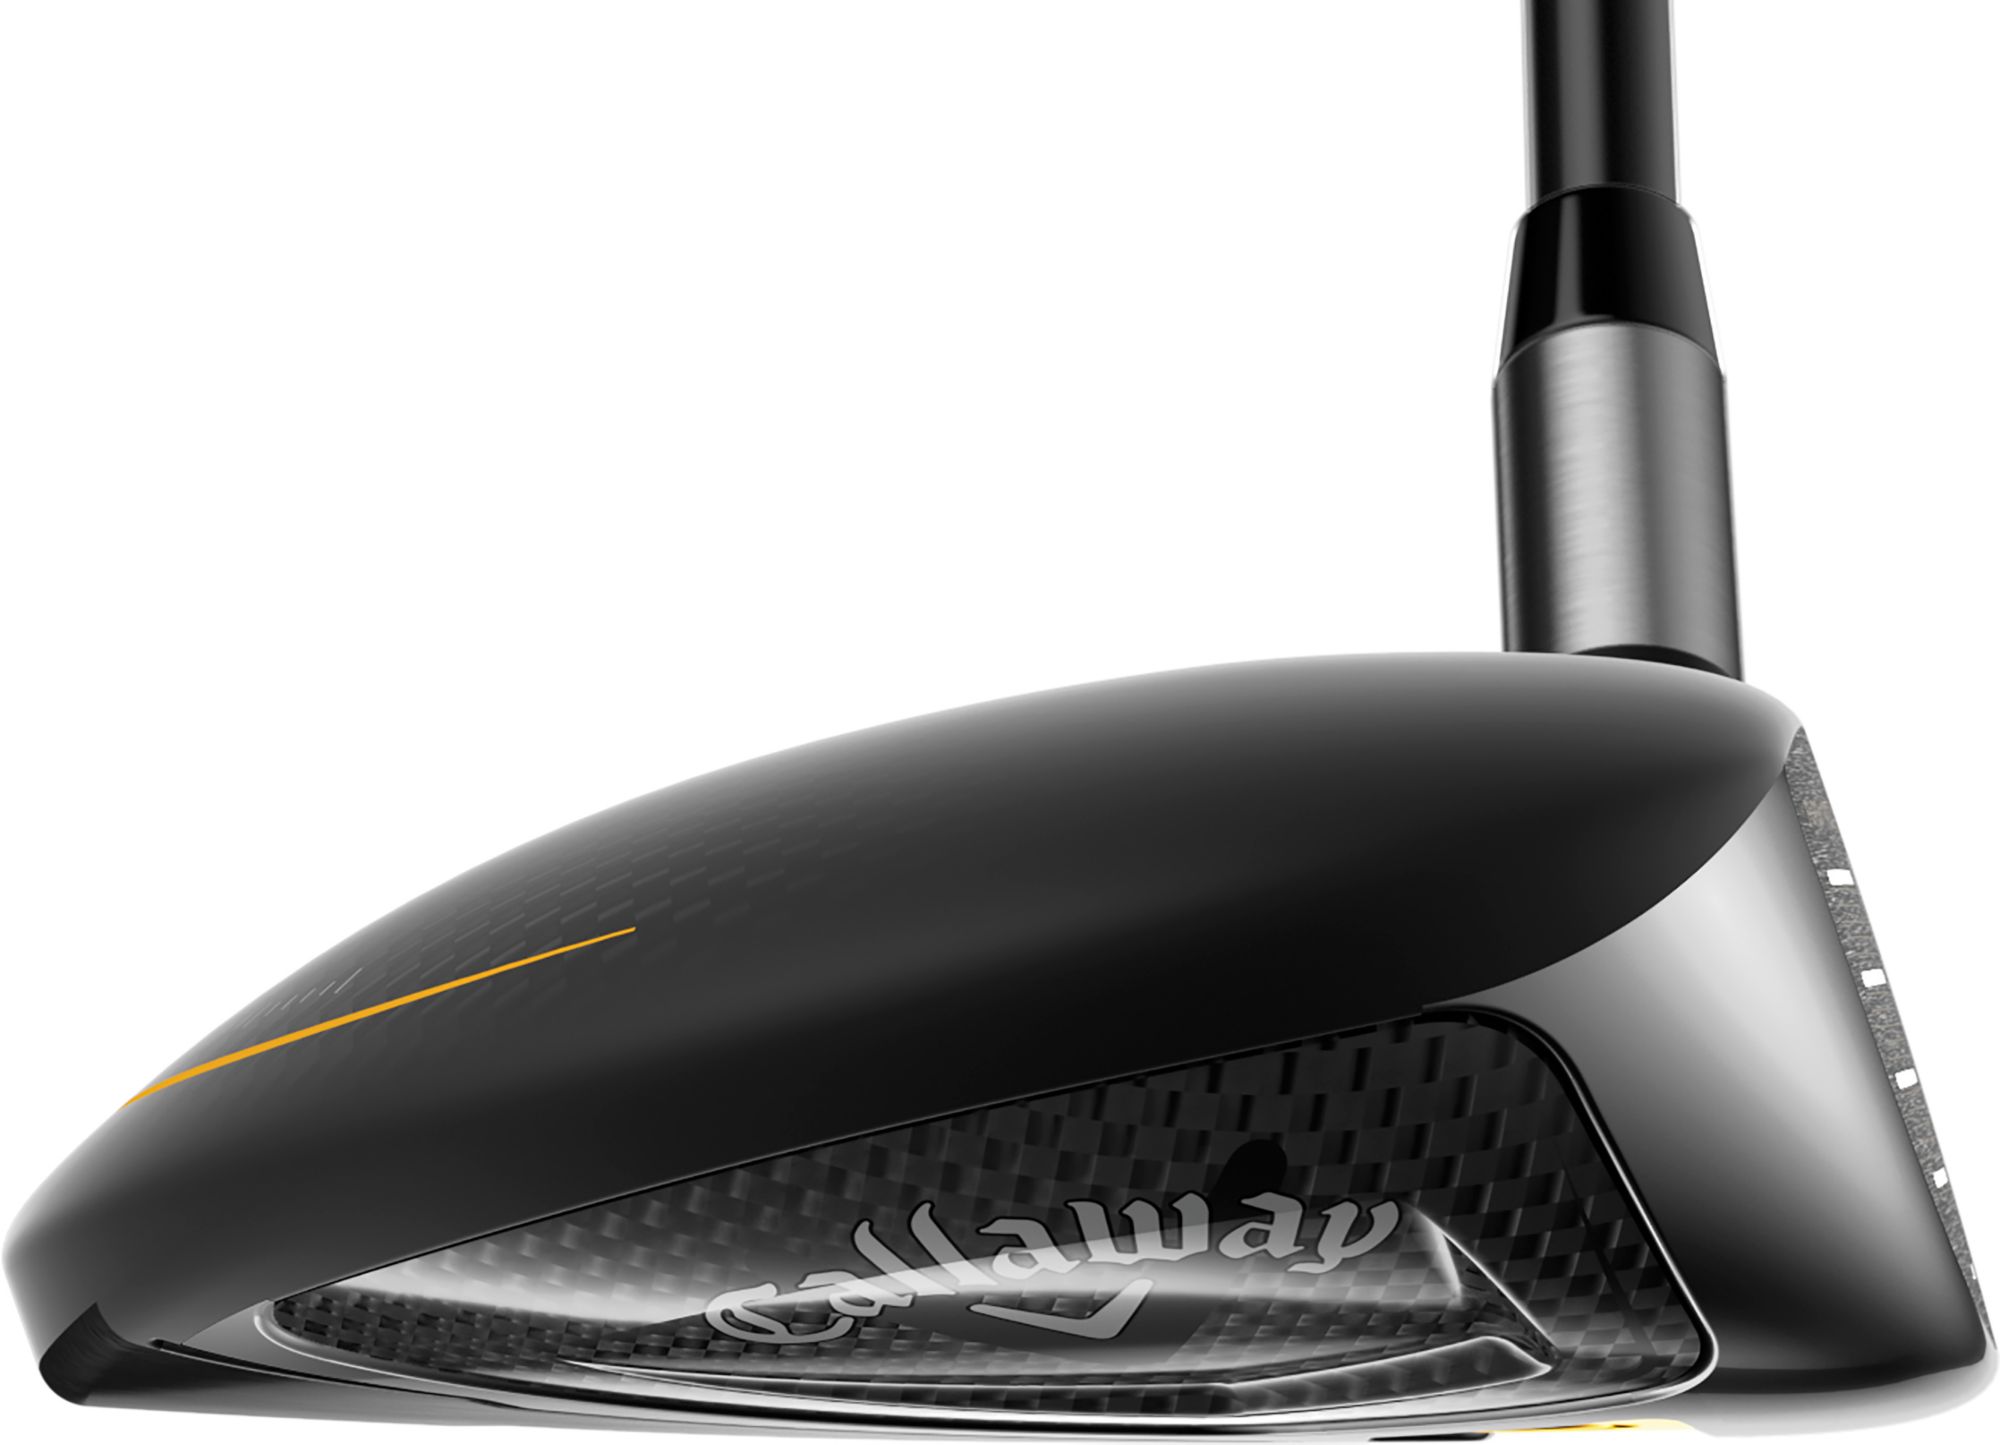 Callaway Rogue ST MAX Fairway Wood - Up to $100 Off | Dick's Sporting Goods